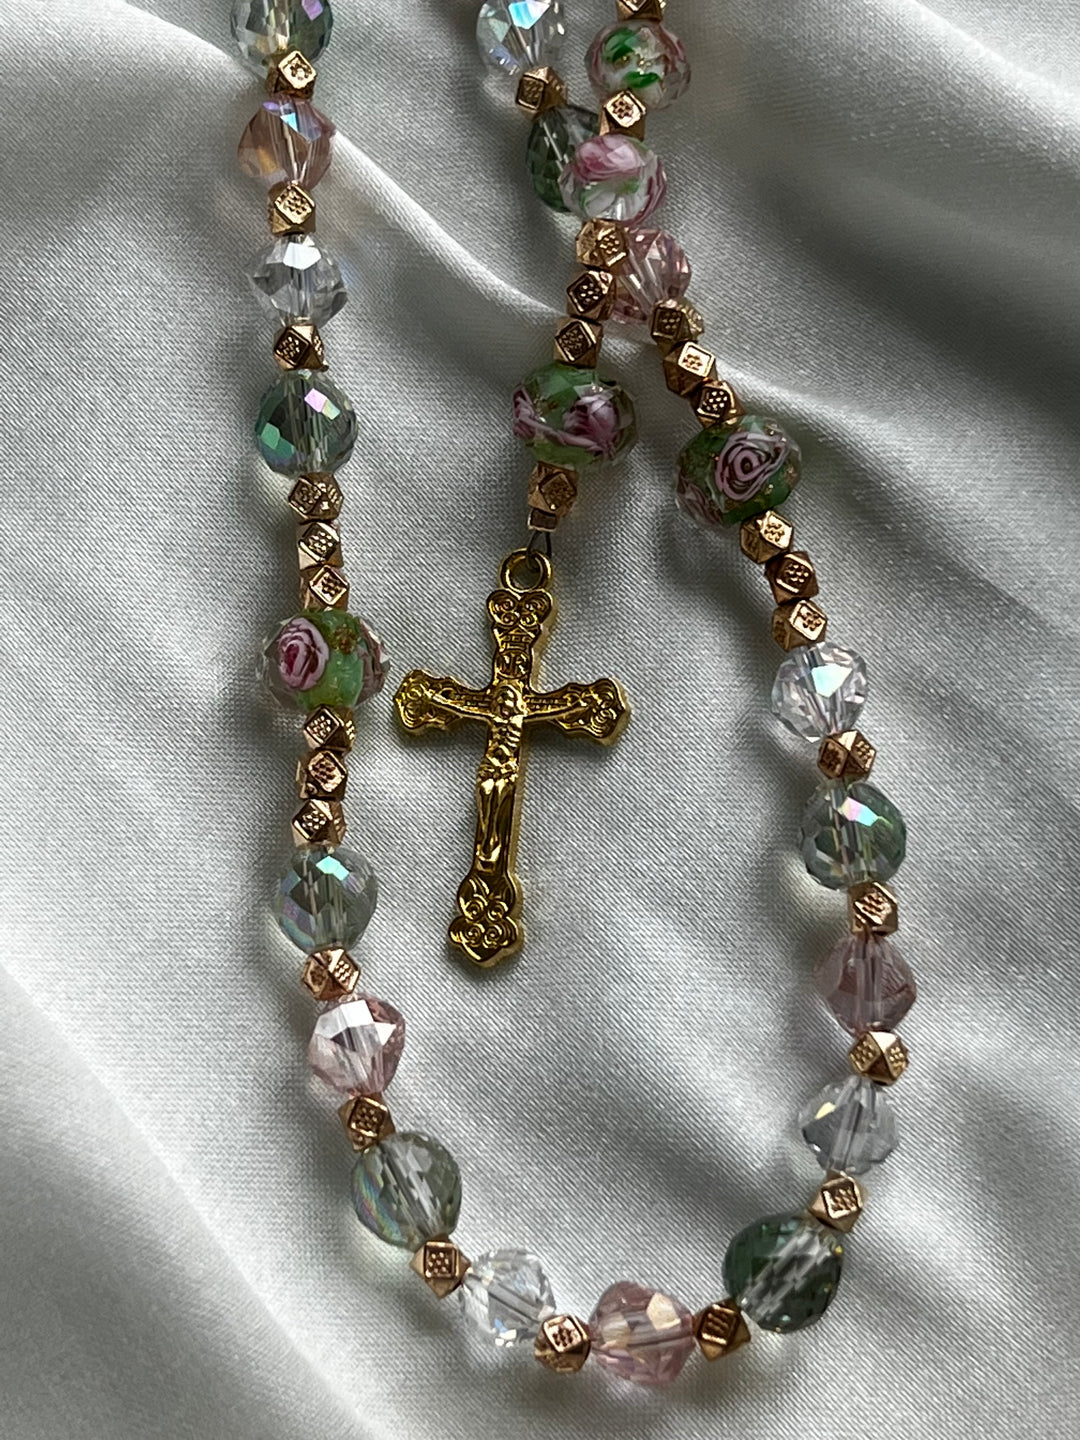 Custom made Rosary designed by you!!